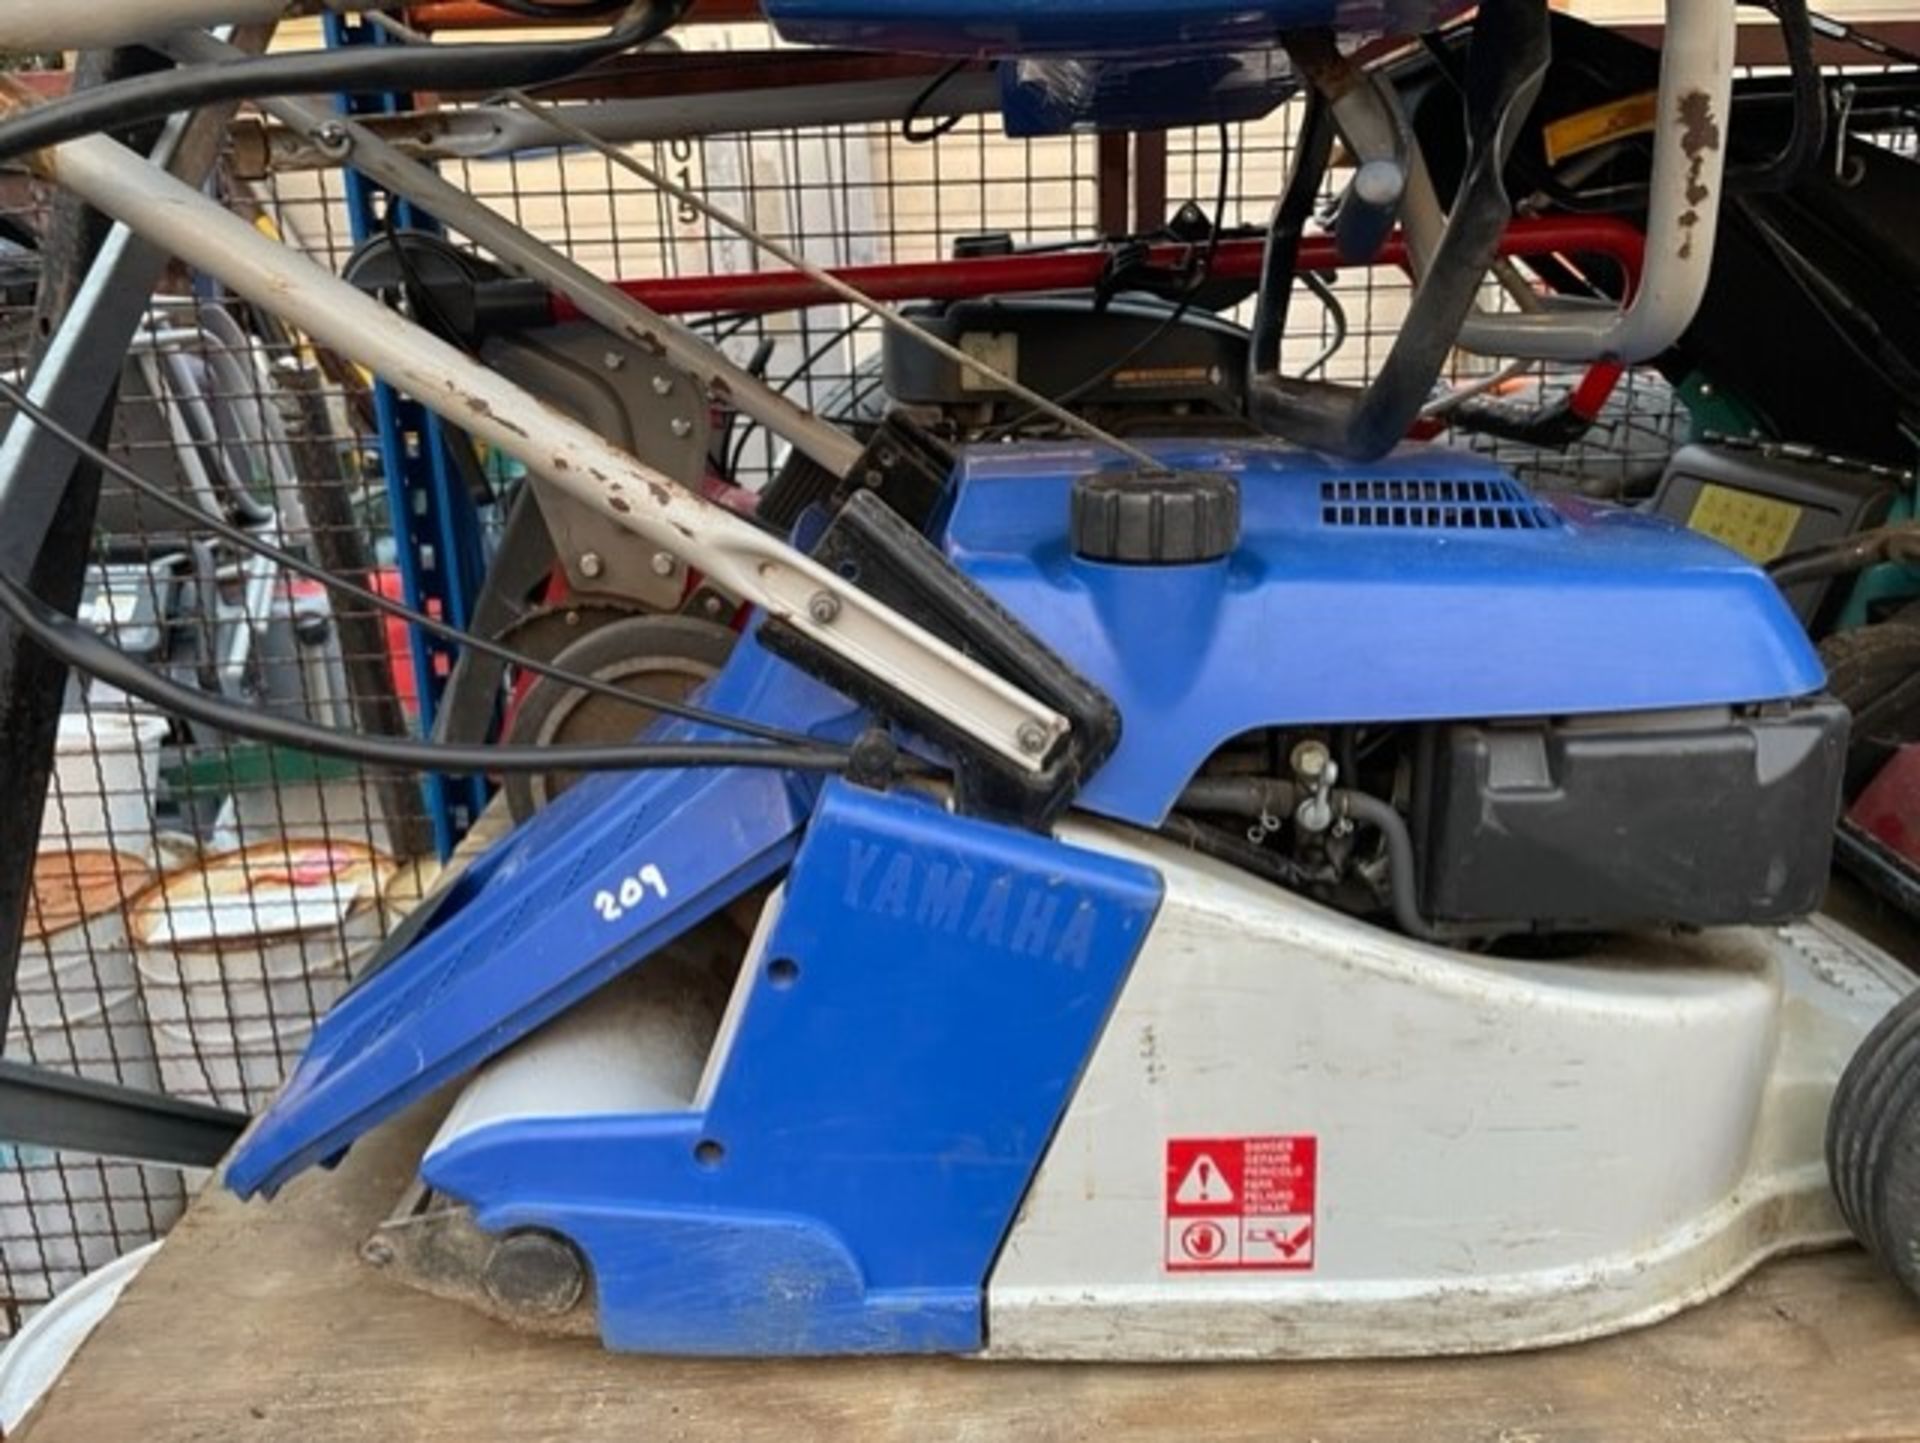 Yamaha lawn mower with roller on back not started in long time service needed